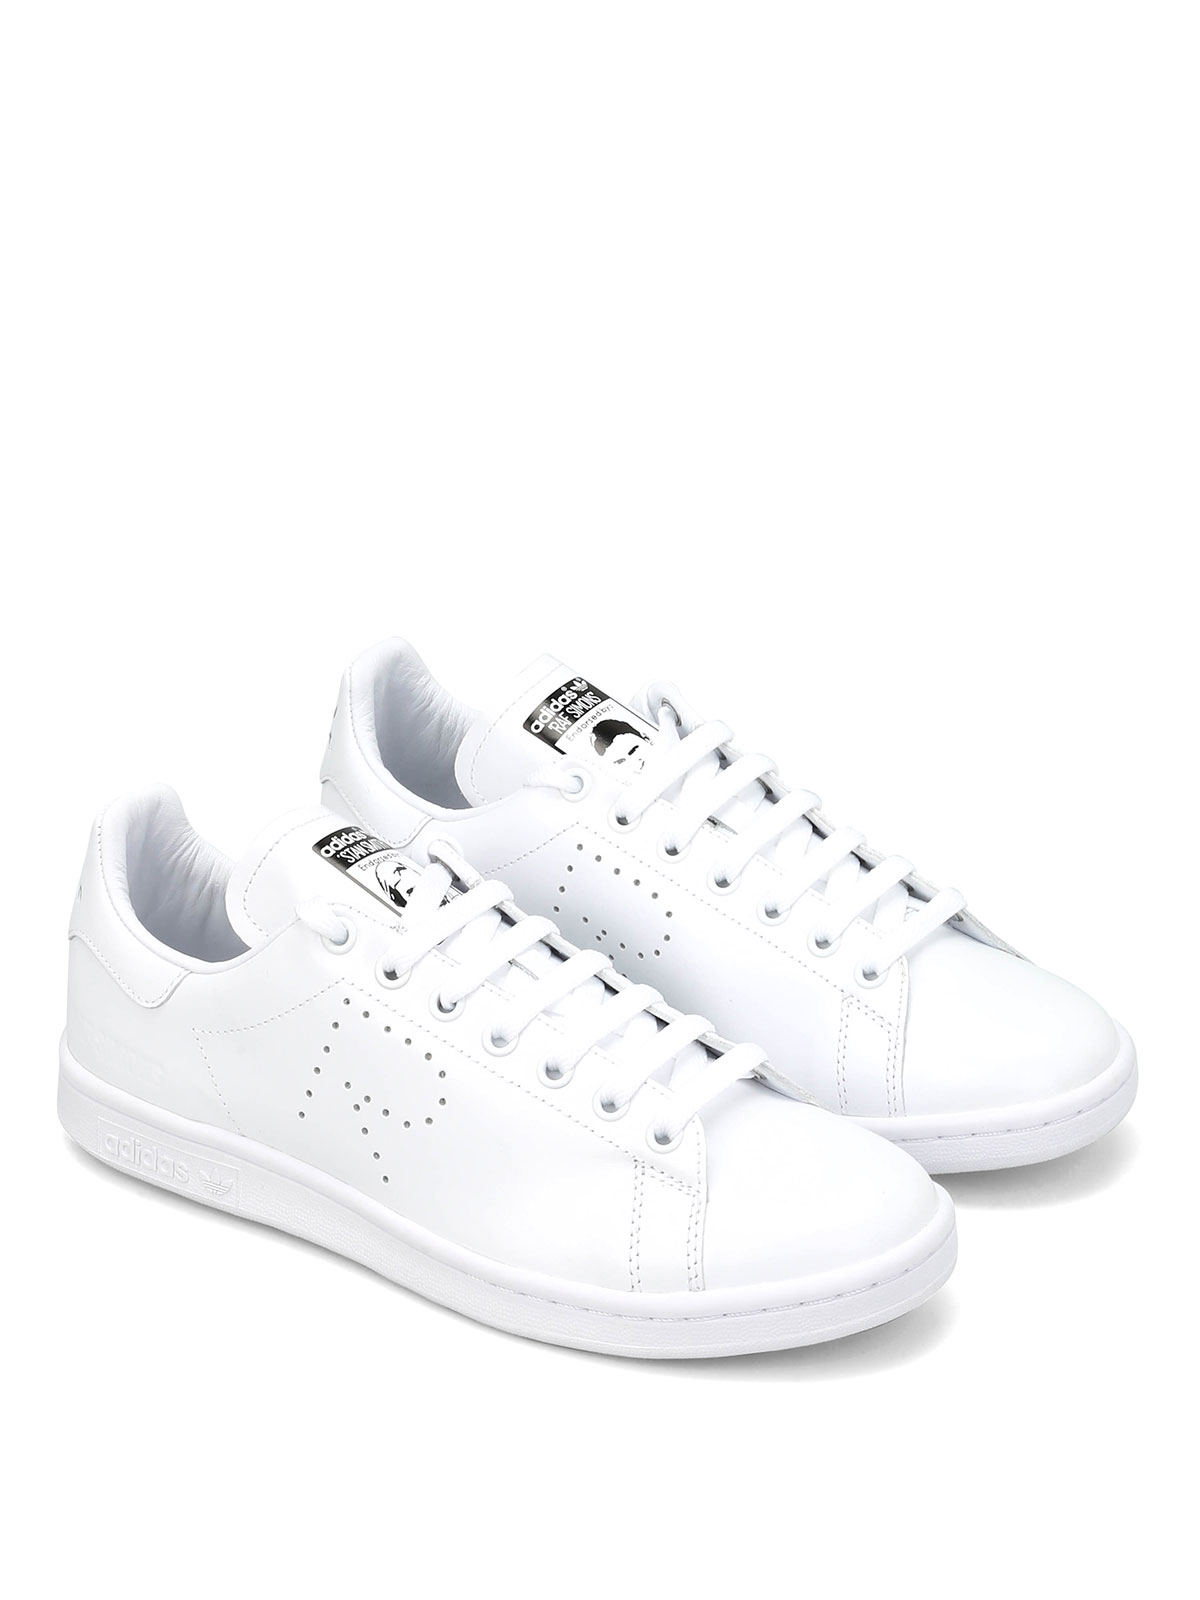 lacing up stan smiths